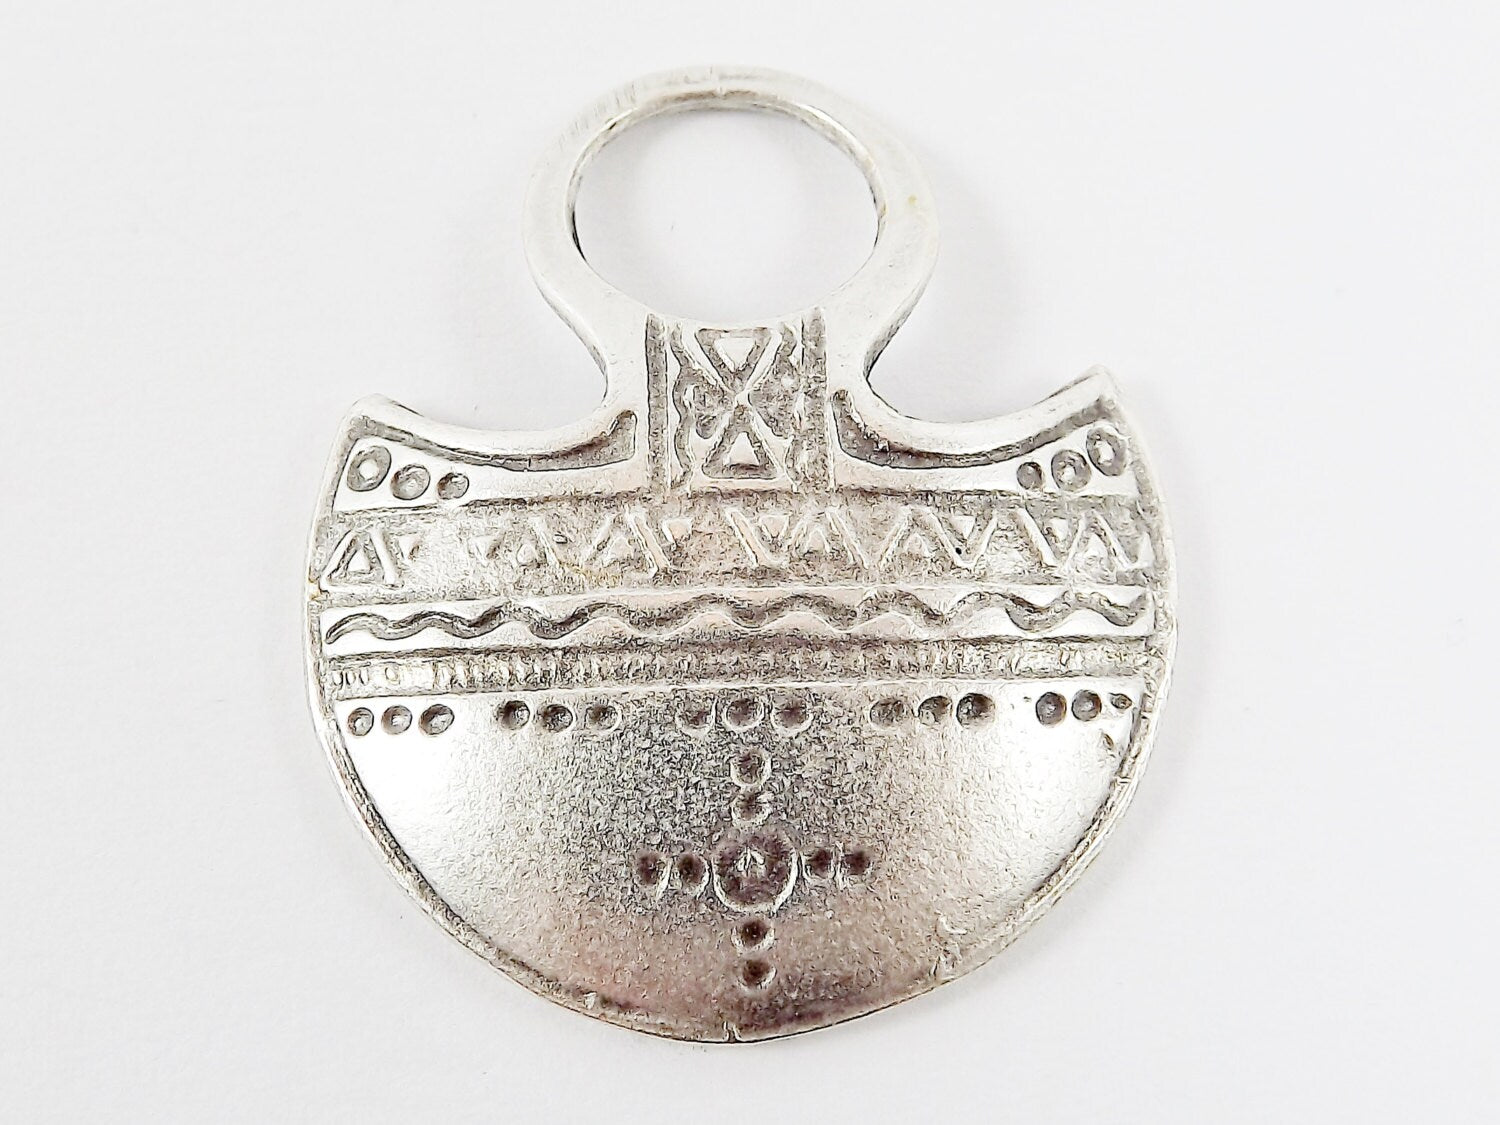 Tribal Ethnic Dome Pendant Geometric Pattern - Matte Antique Silver Plated - 1PC